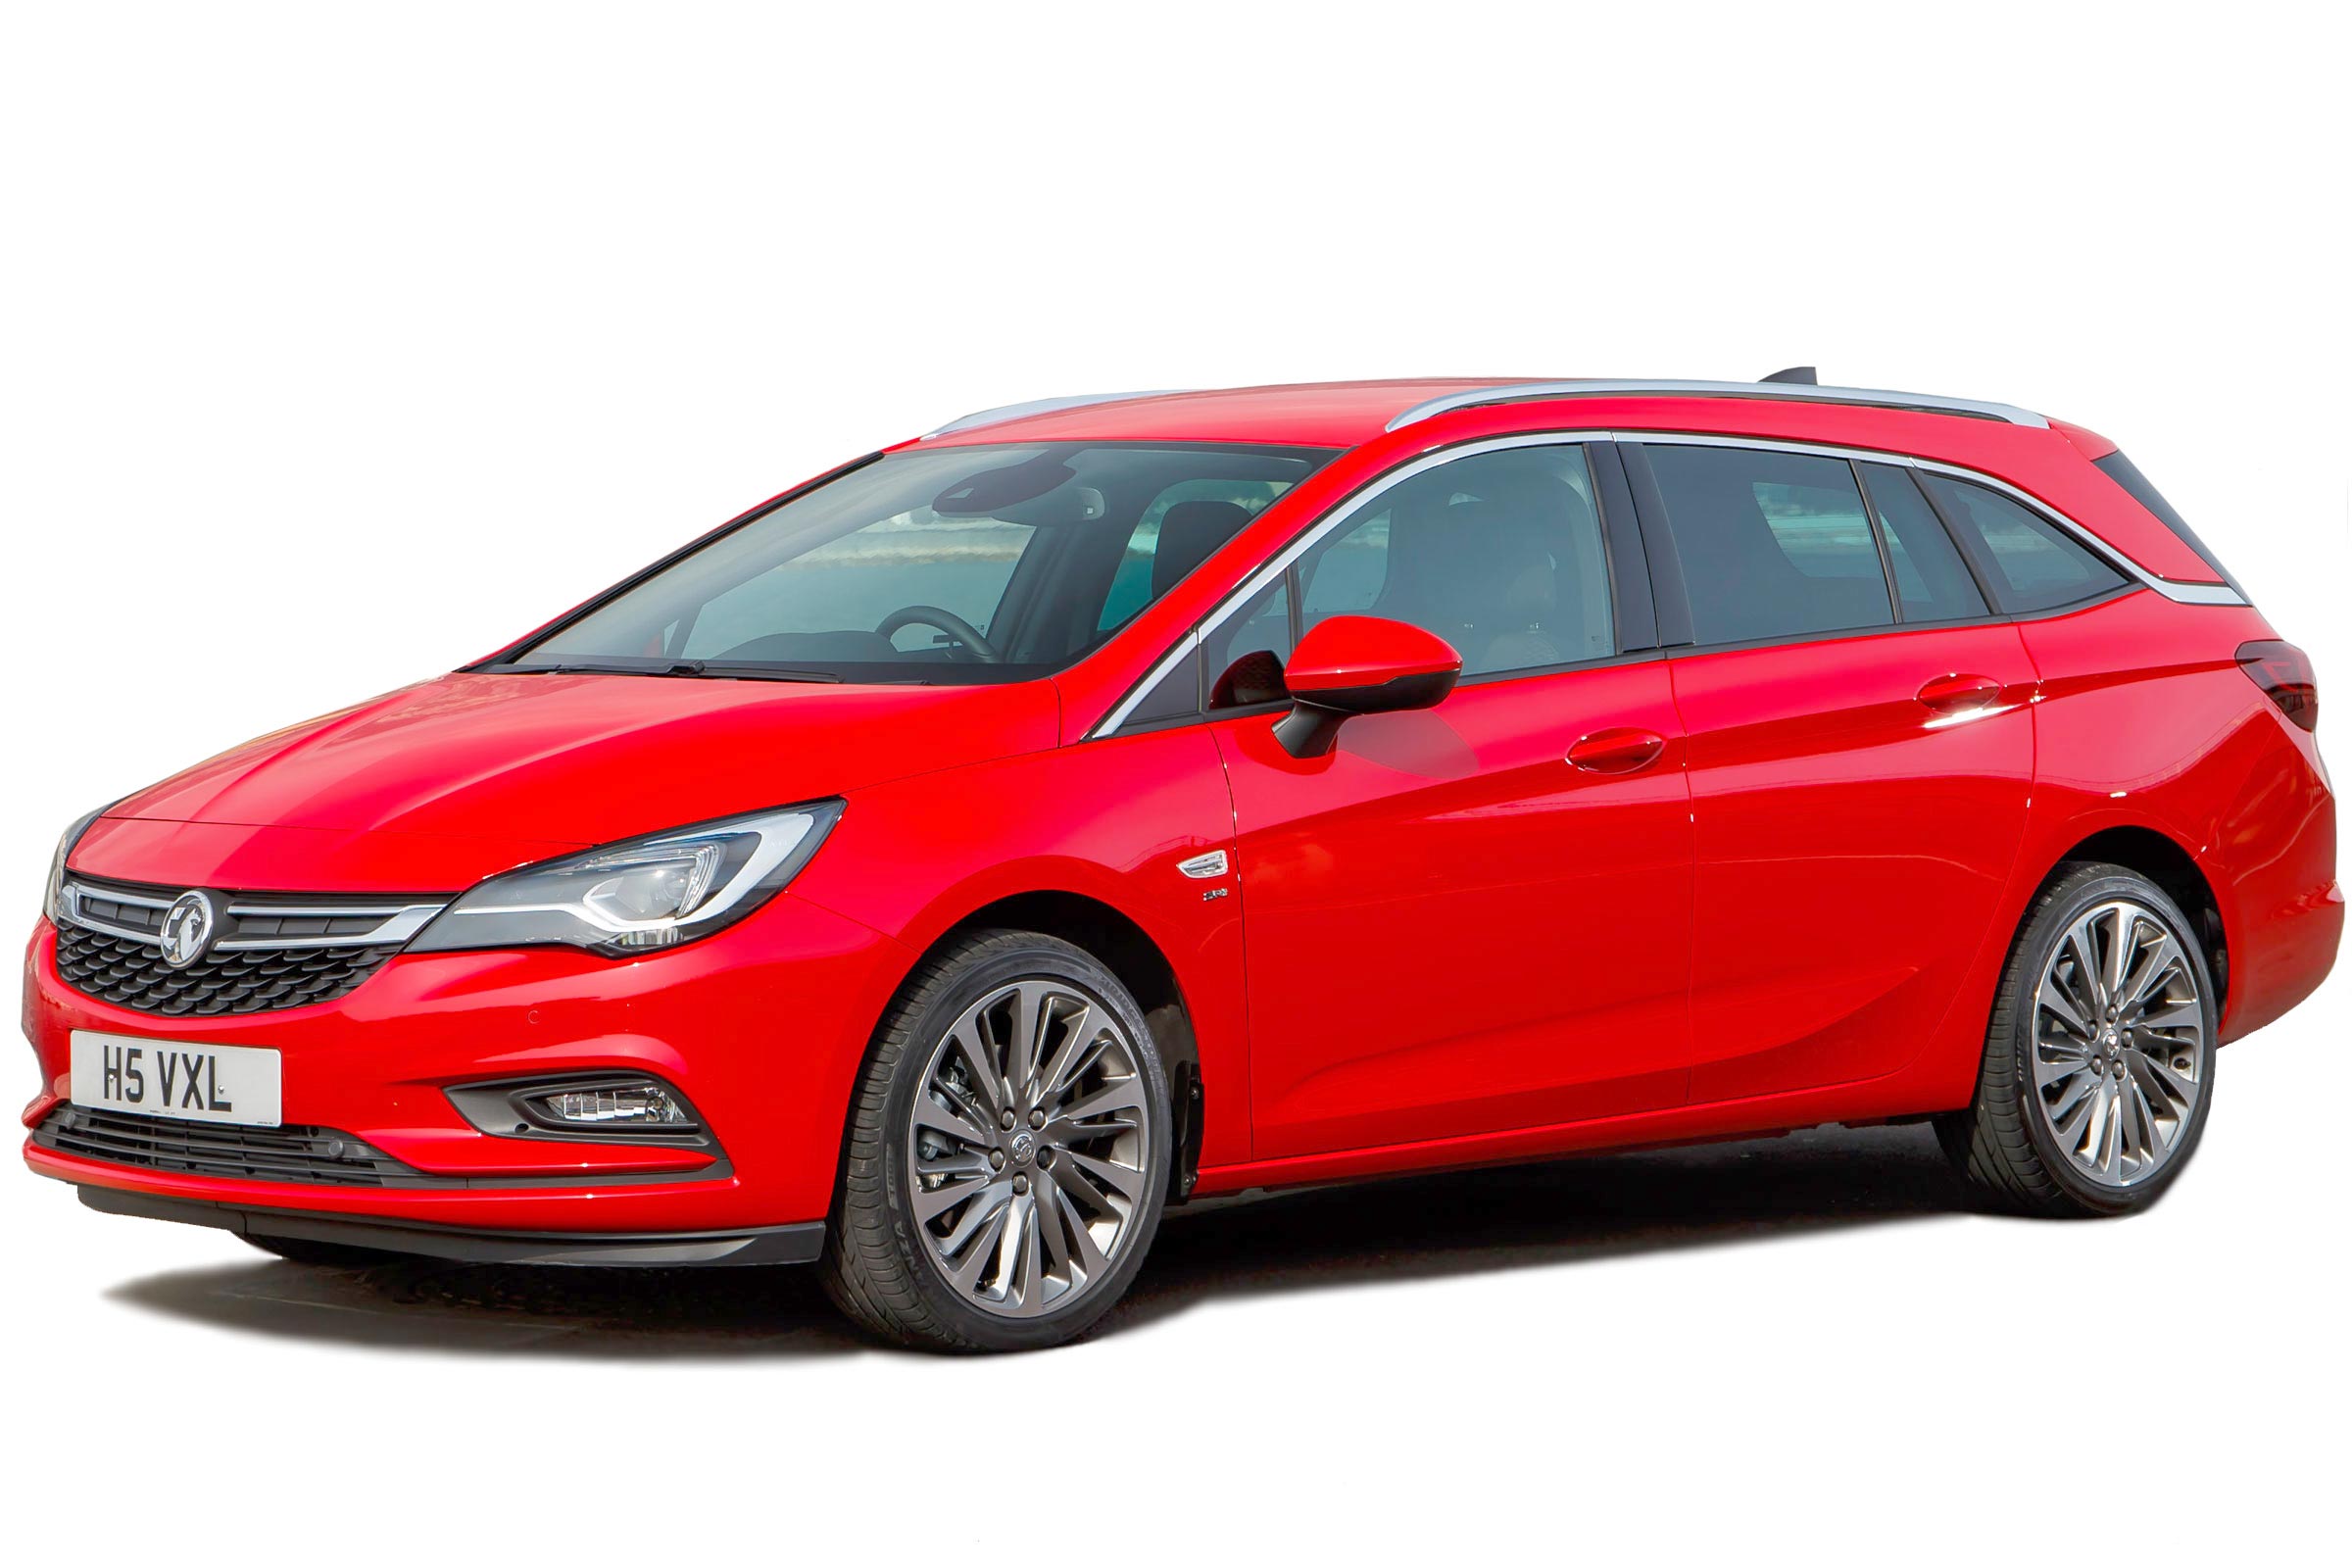 Vauxhall Astra Sports Tourer Estate Practicality Boot Space 2020 Review Carbuyer